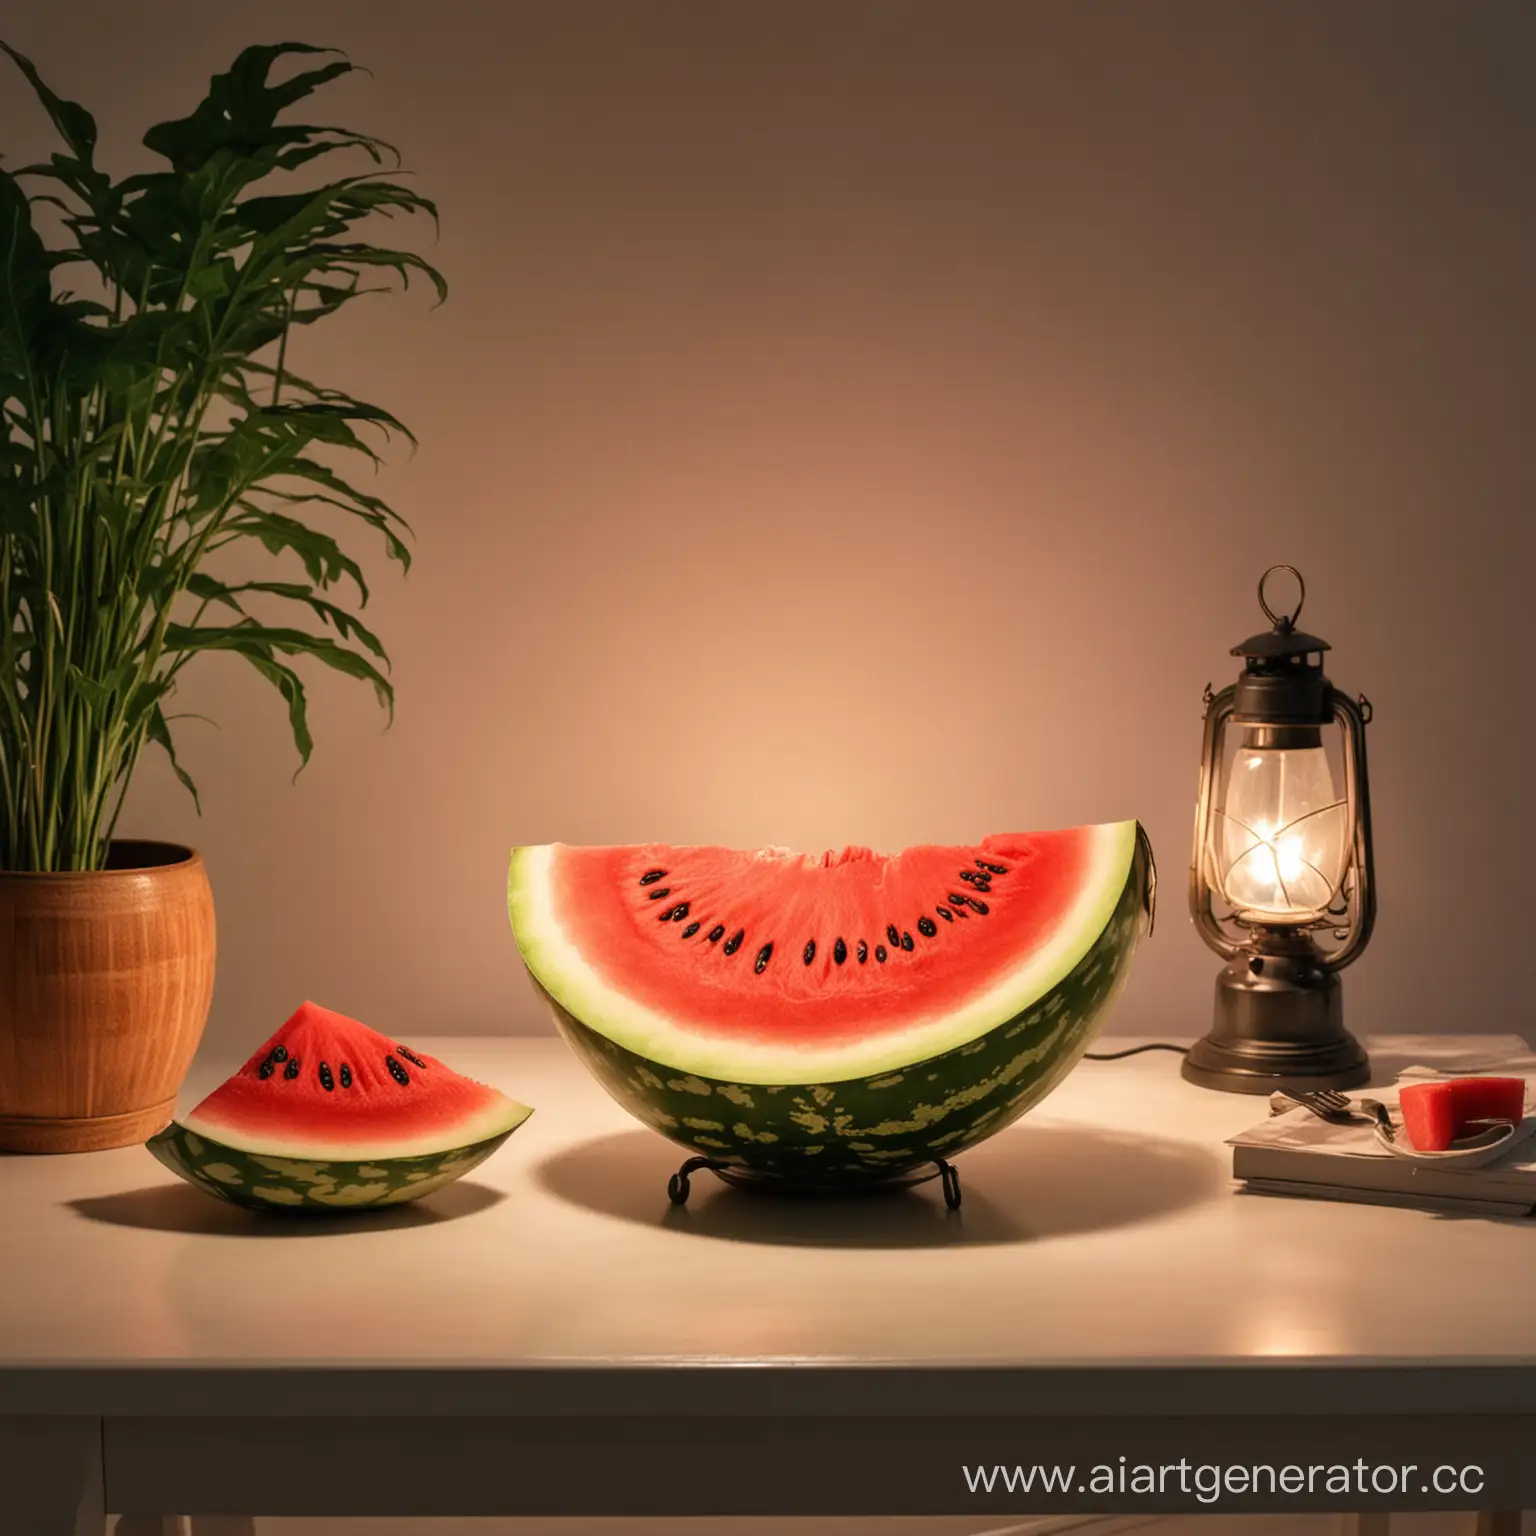 The watermelon is lying on the table and it is illuminated by a lamp
